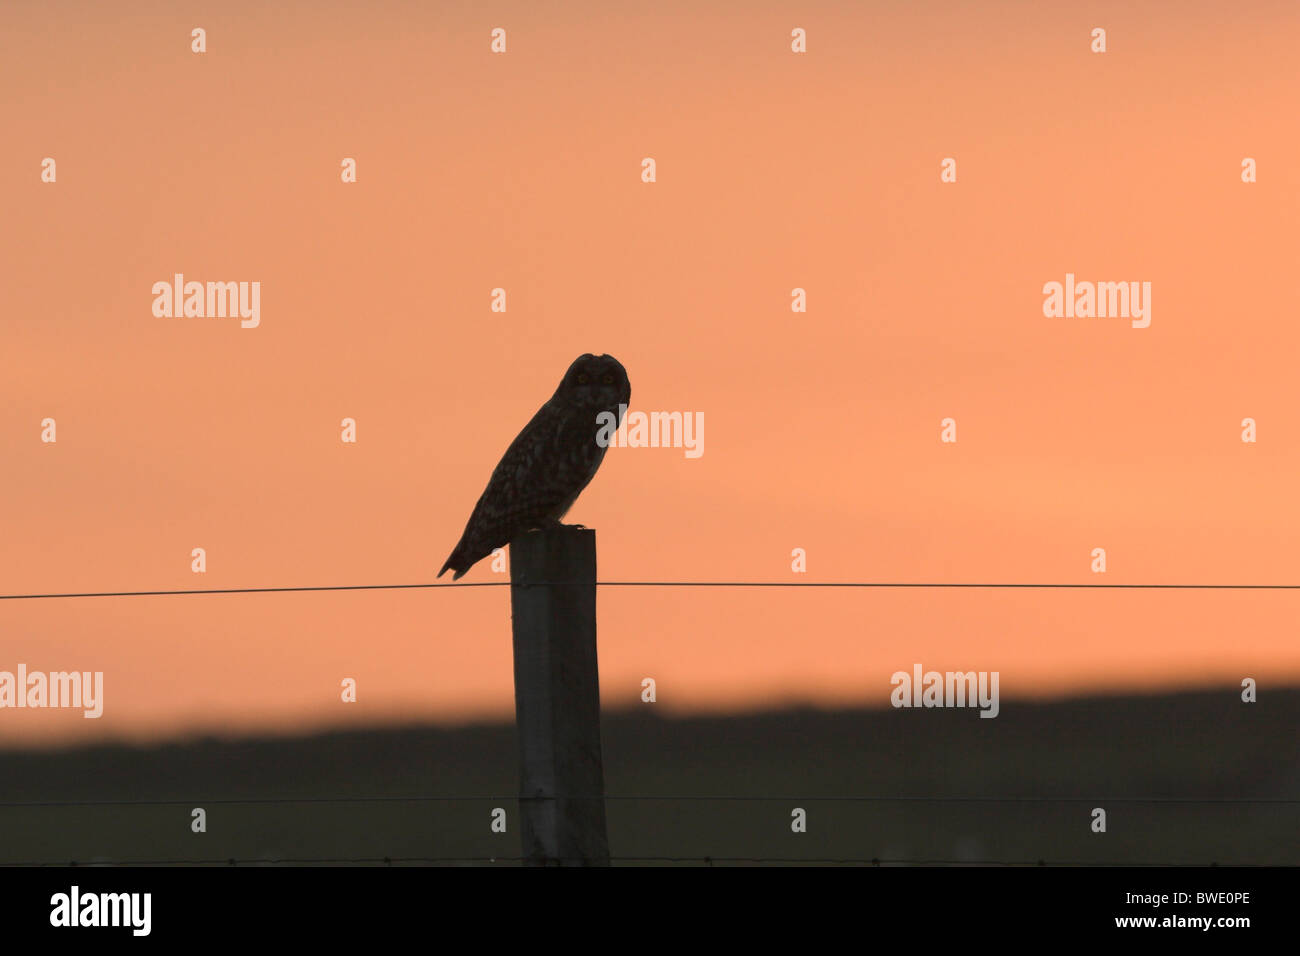 Short-eared owl Asio flammeus on fence post at sunset Eday Orkney Orkney Isles Stock Photo